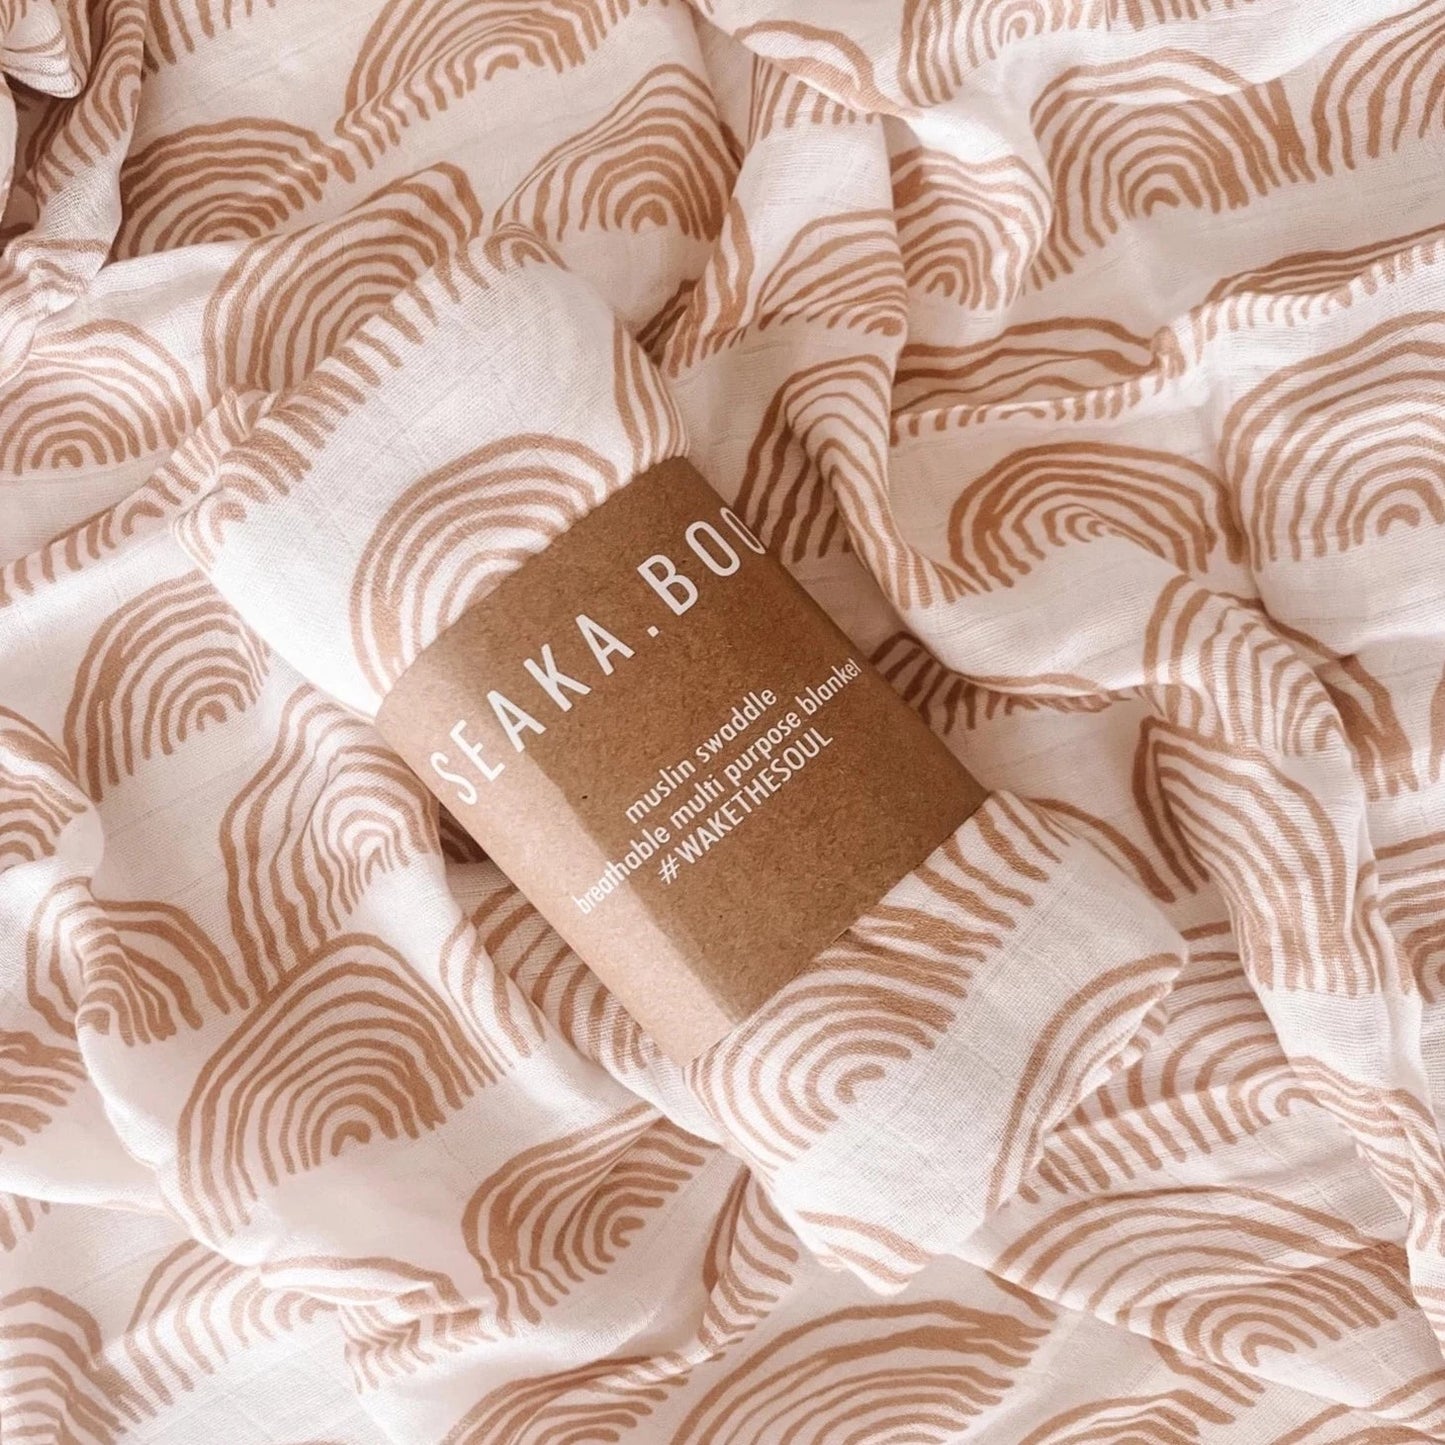 This picture shows the Bamboo / cotton Swaddle wrap with a nude rainbow print